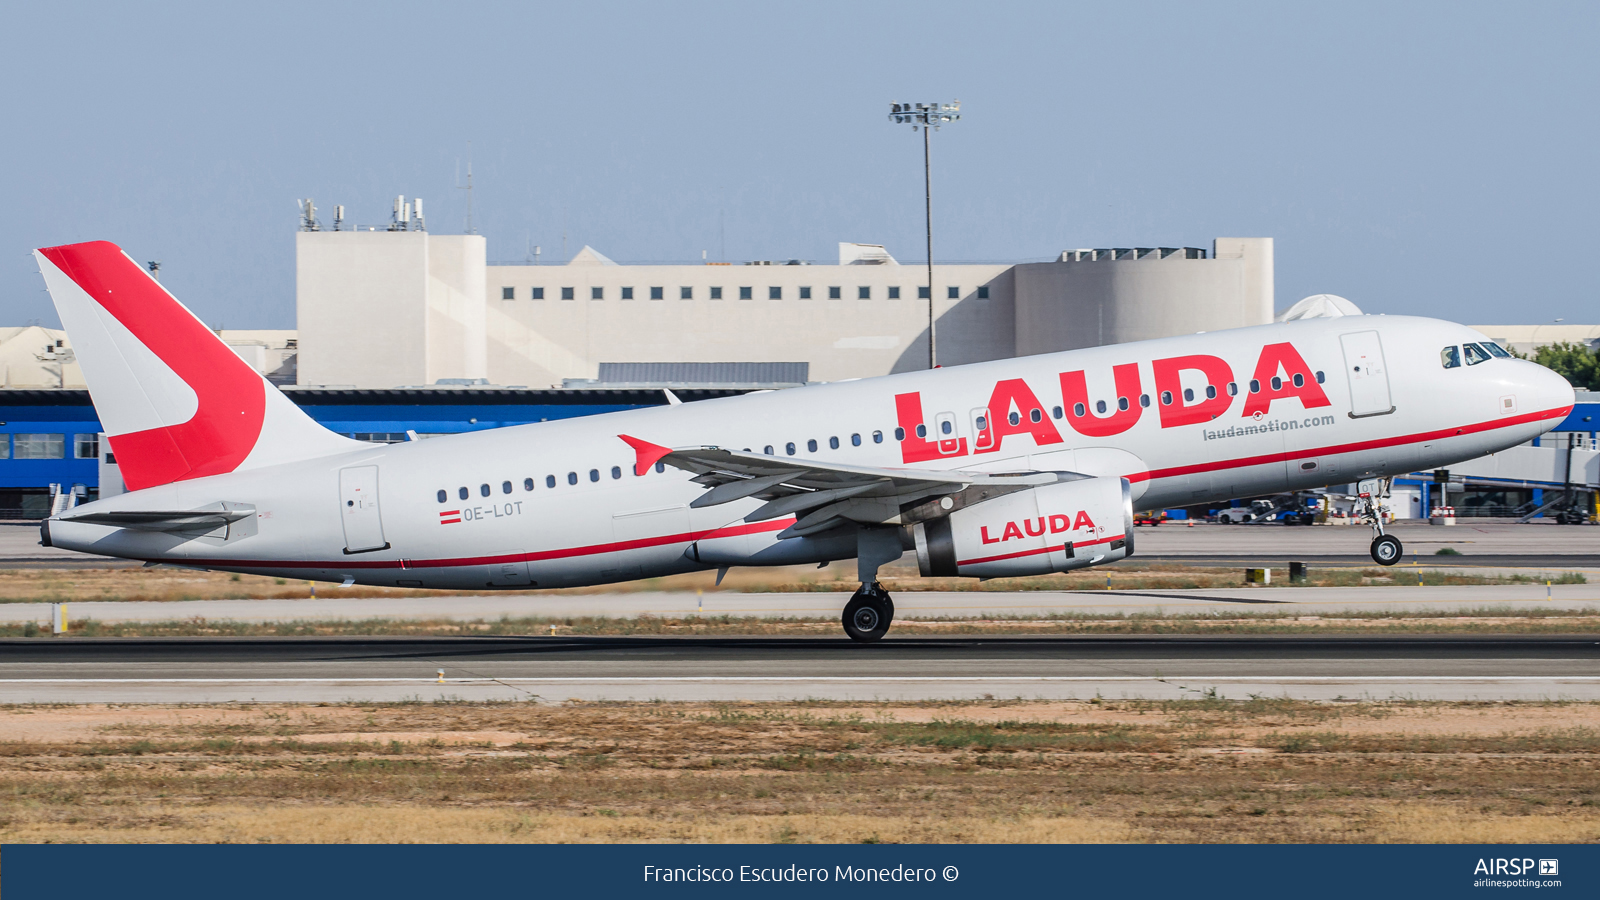 Laudamotion  Airbus A320  OE-LOT